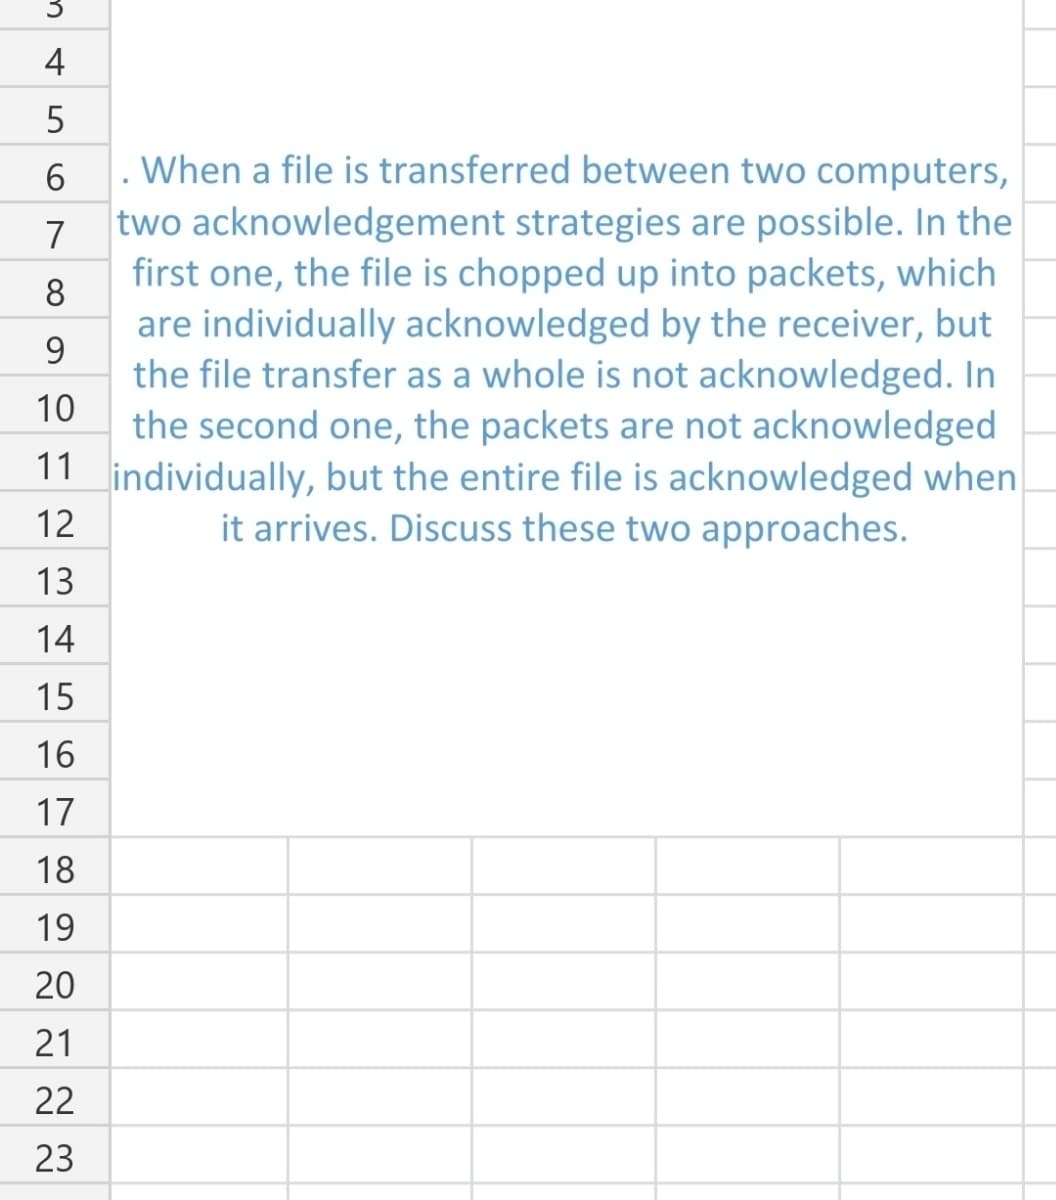 3
4
5
6
7
8
When a file is transferred between two computers,
two acknowledgement strategies are possible. In the
first one, the file is chopped up into packets, which
are individually acknowledged by the receiver, but
the file transfer as a whole is not acknowledged. In
the second one, the packets are not acknowledged
11 individually, but the entire file is acknowledged when
9
10
12
it arrives. Discuss these two approaches.
13
14
15
16
17
18
19
20
21
22
23
.